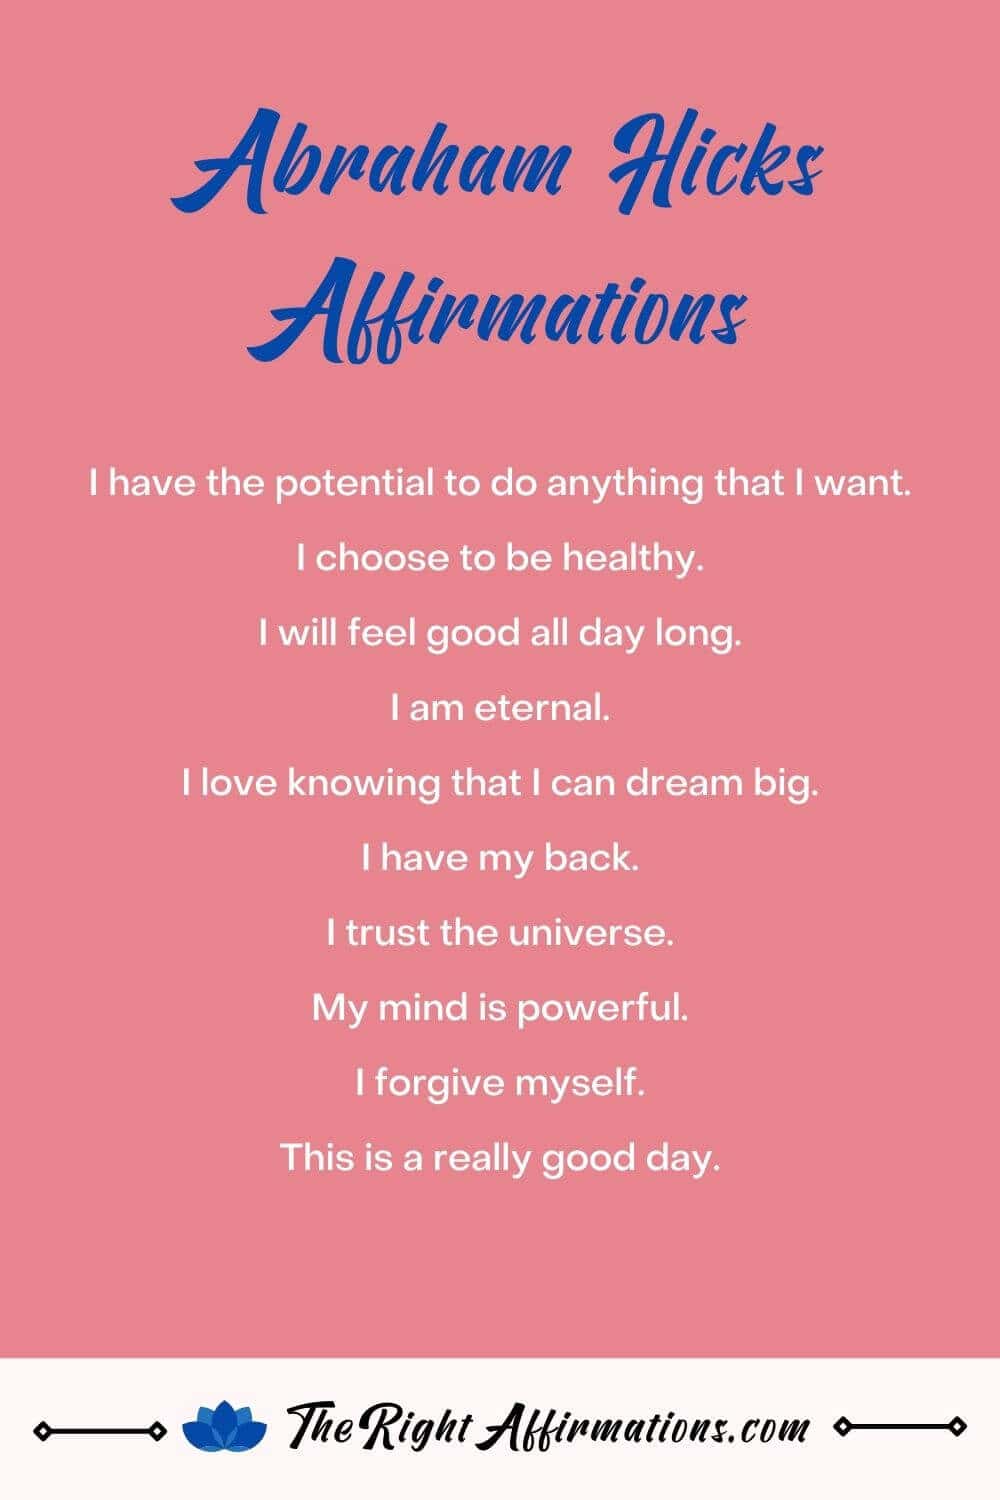 best-abraham-hicks-affirmations-for-wealth-and-success